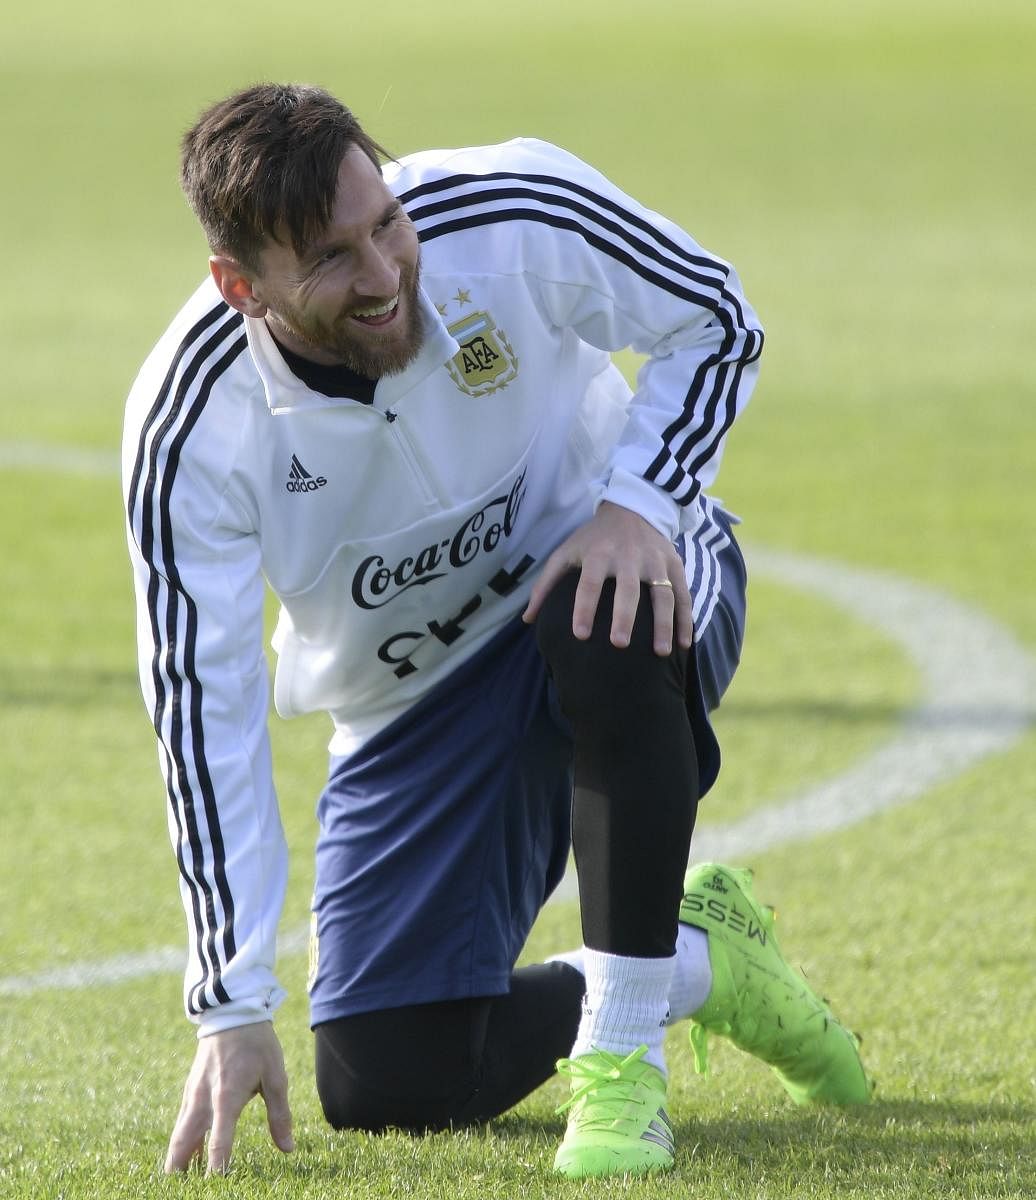 READY STEADY GO! All eyes will be on superstar Lionel Messi when Argentina locks horns against Iceland on Saturday. AFP